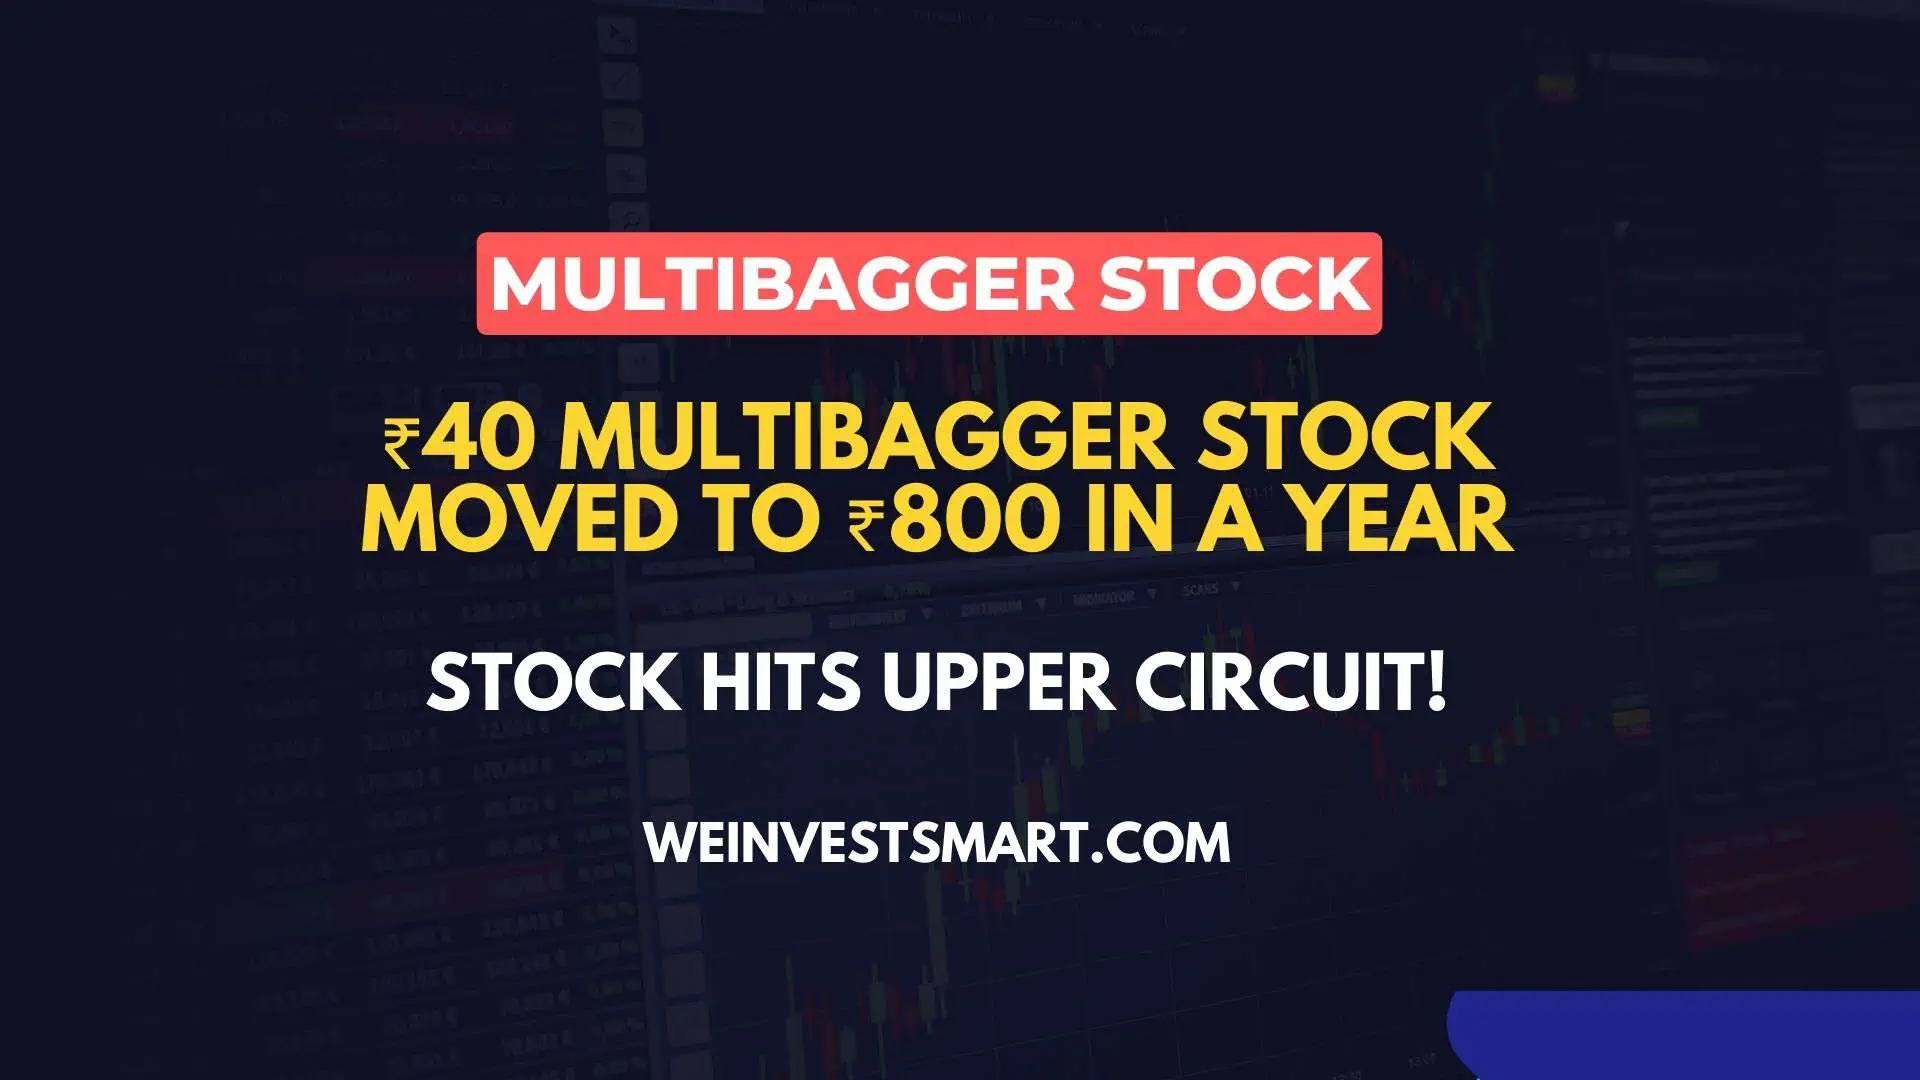 ₹40 Multibagger Stock moved to ₹800 in a year, Shares hit upper circuit daily